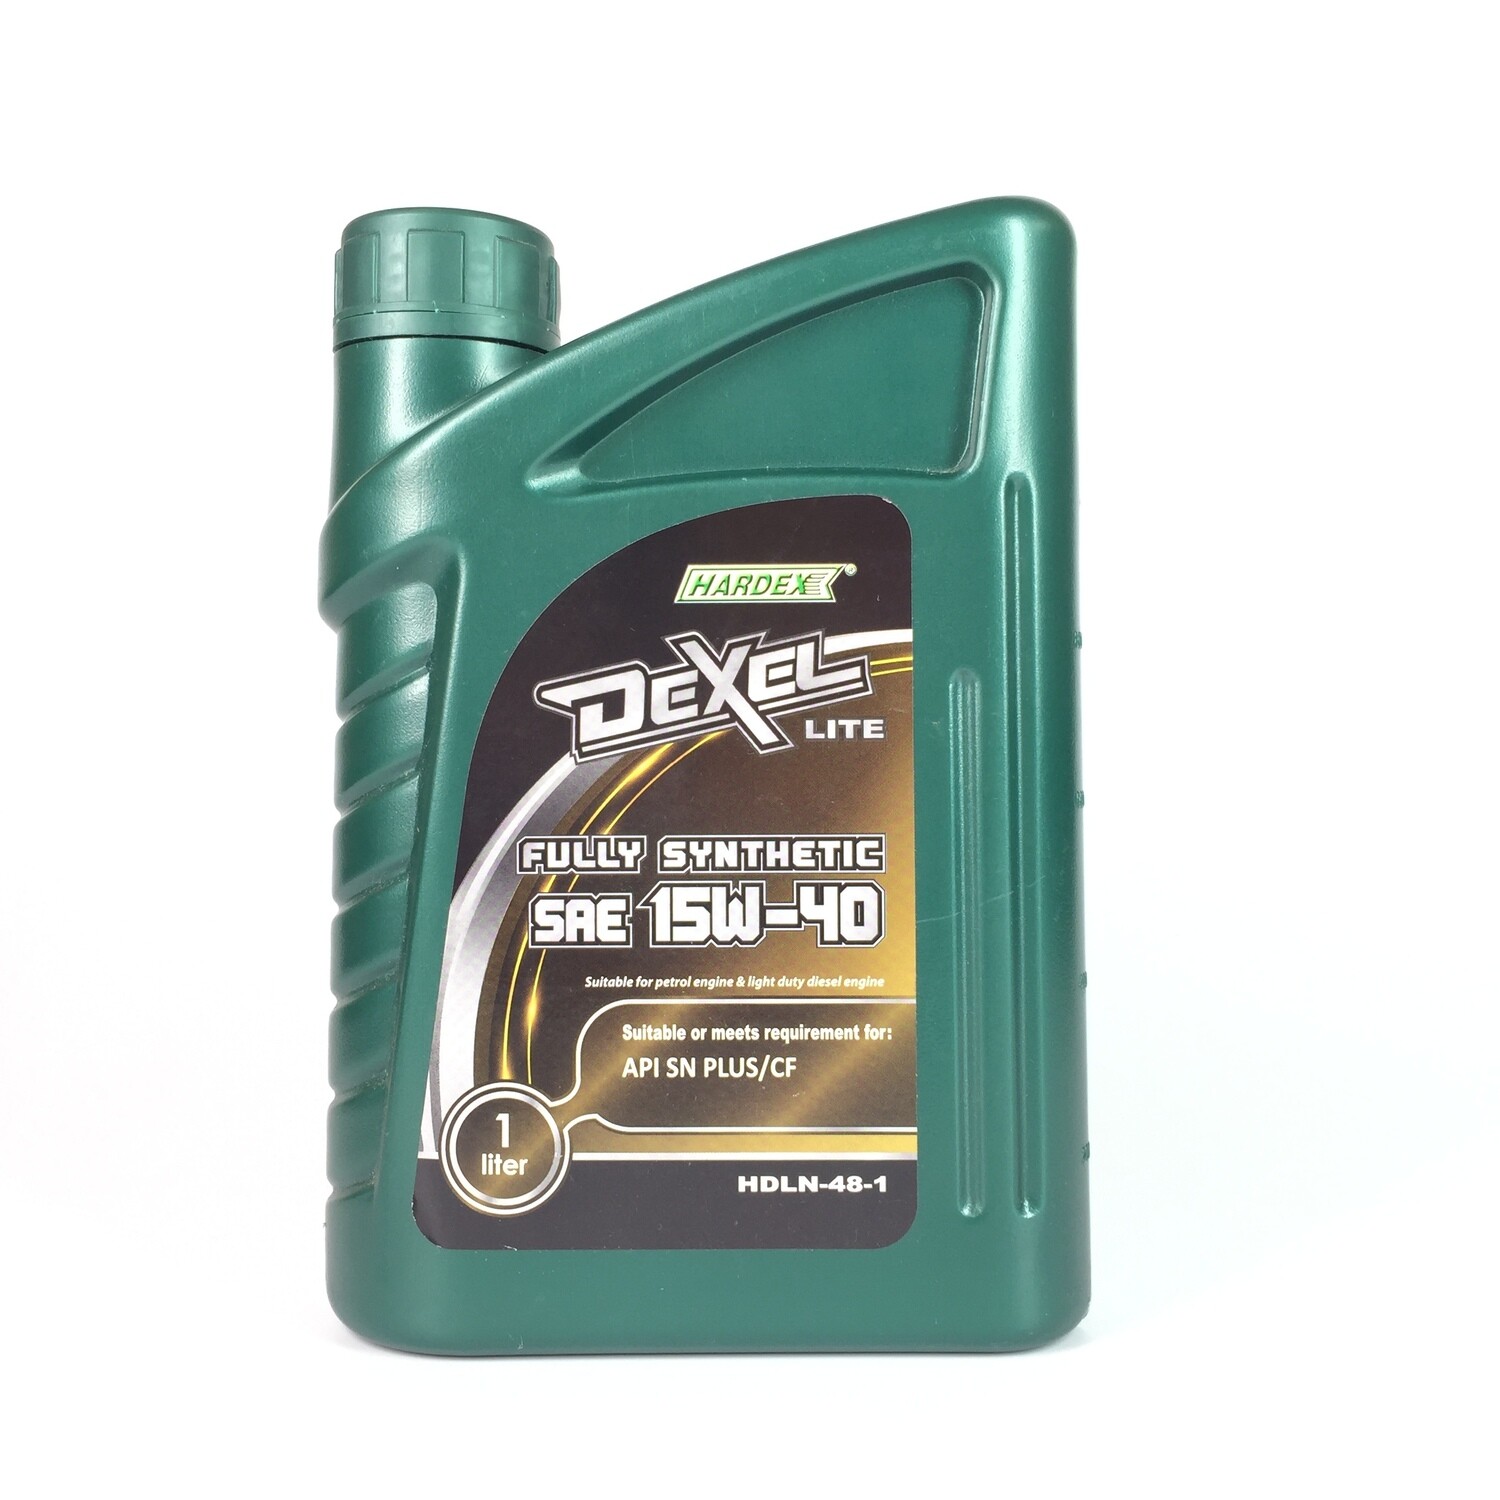 HARDEX Dexel Lite SAE 15W-40 Fully Synthetic Gasoline and Light Duty Diesel Engine Oil